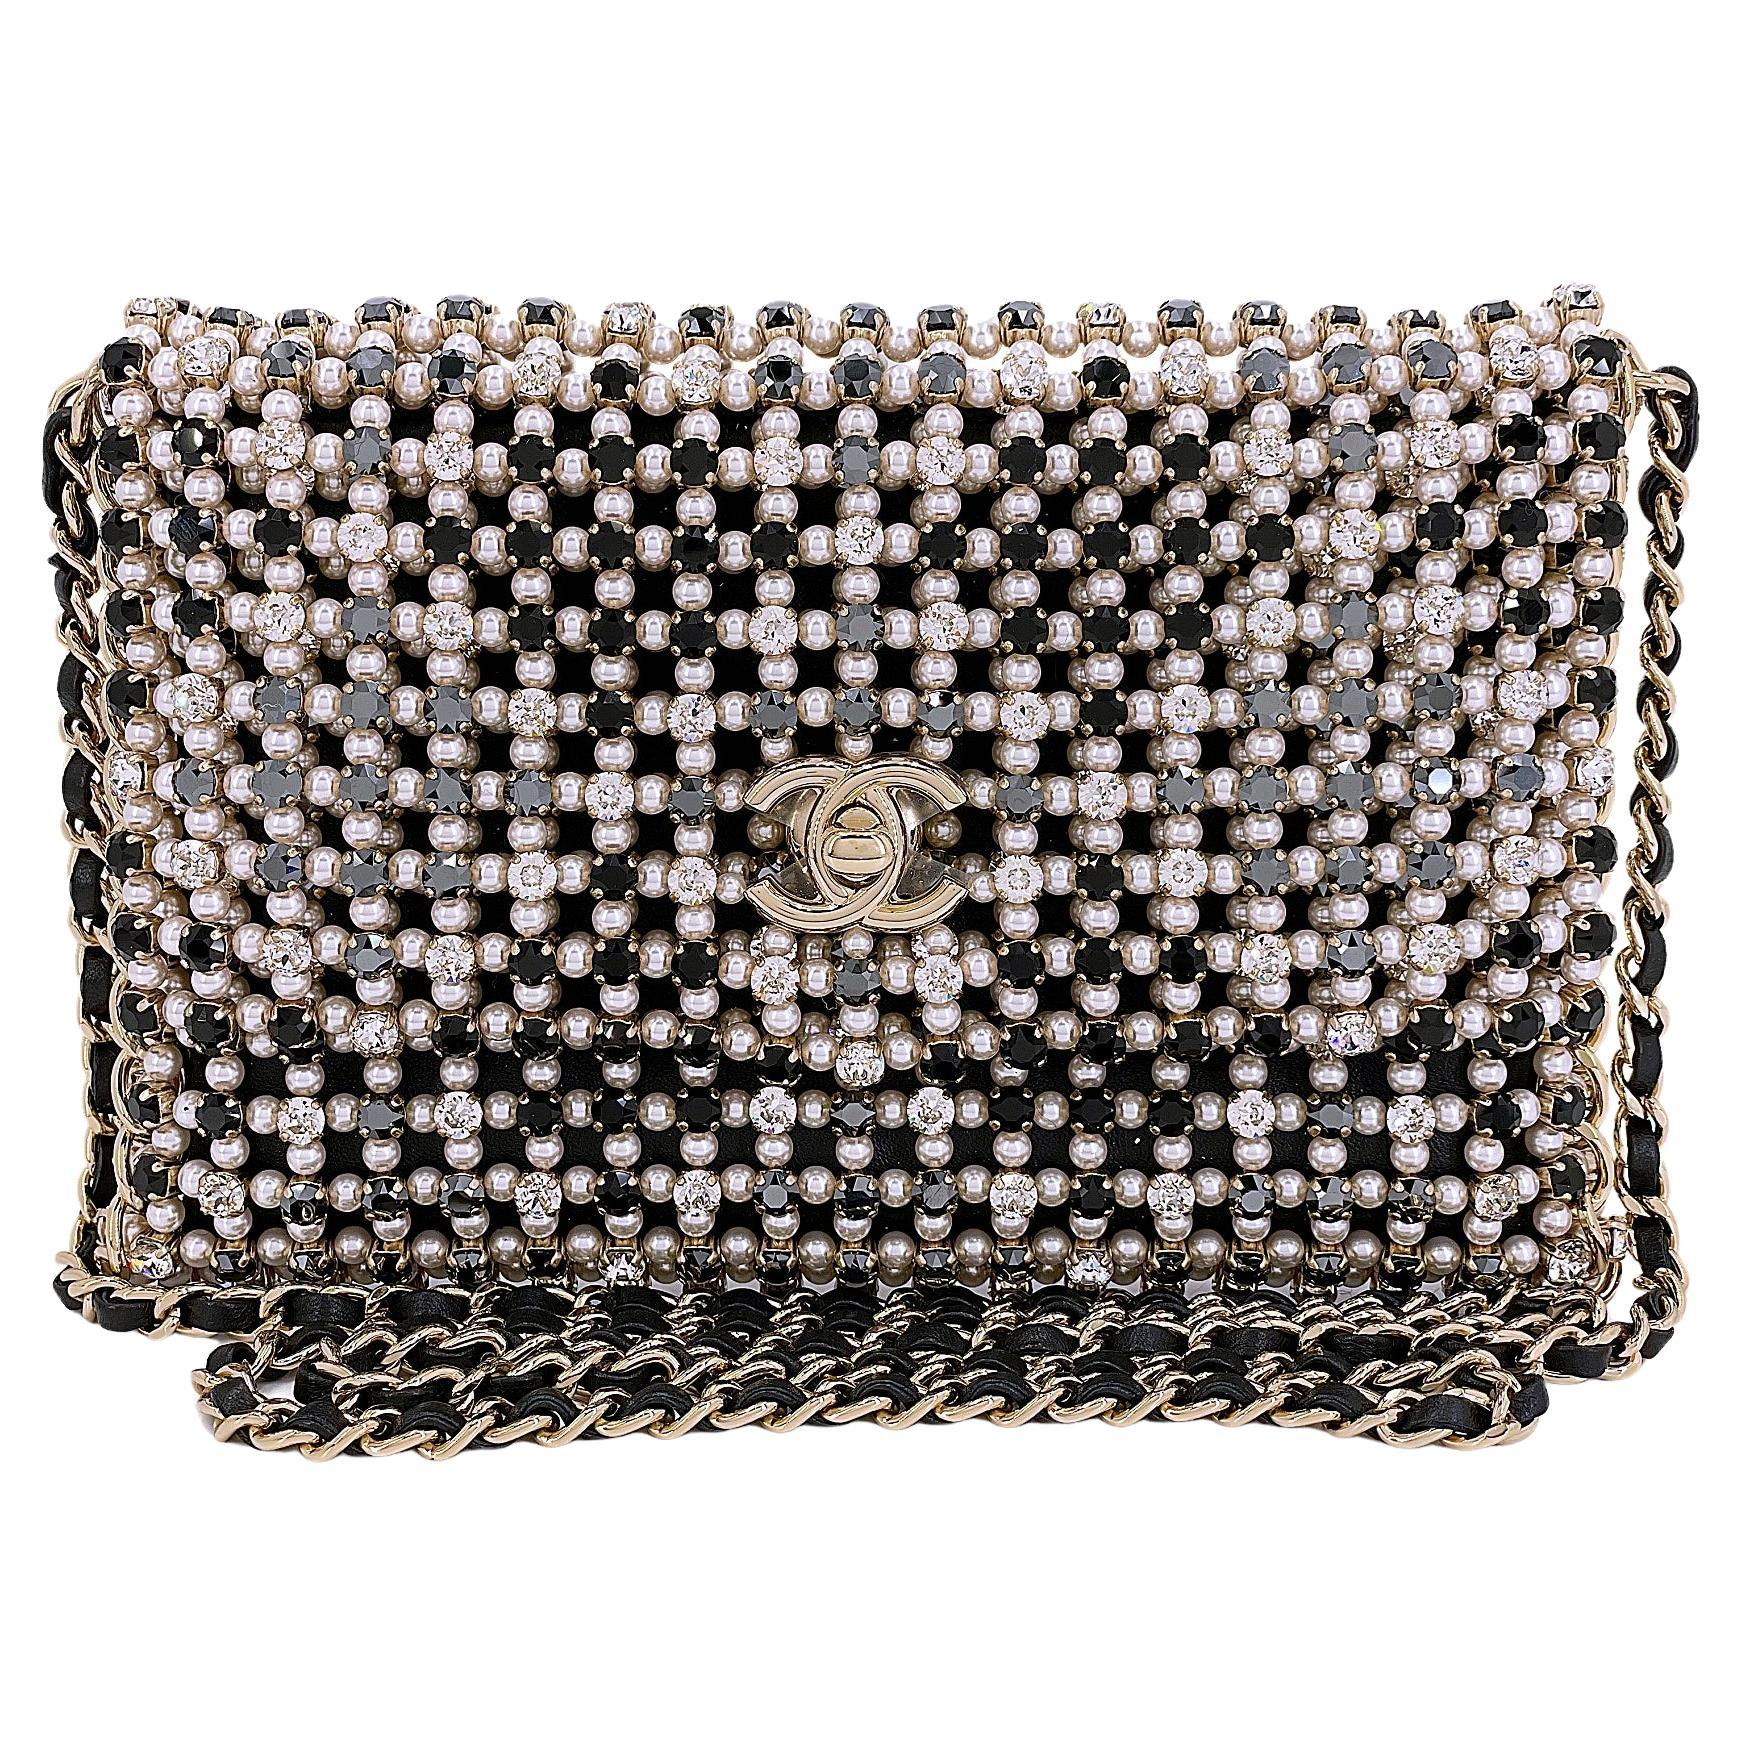 What is the Chanel Pearl Crush?